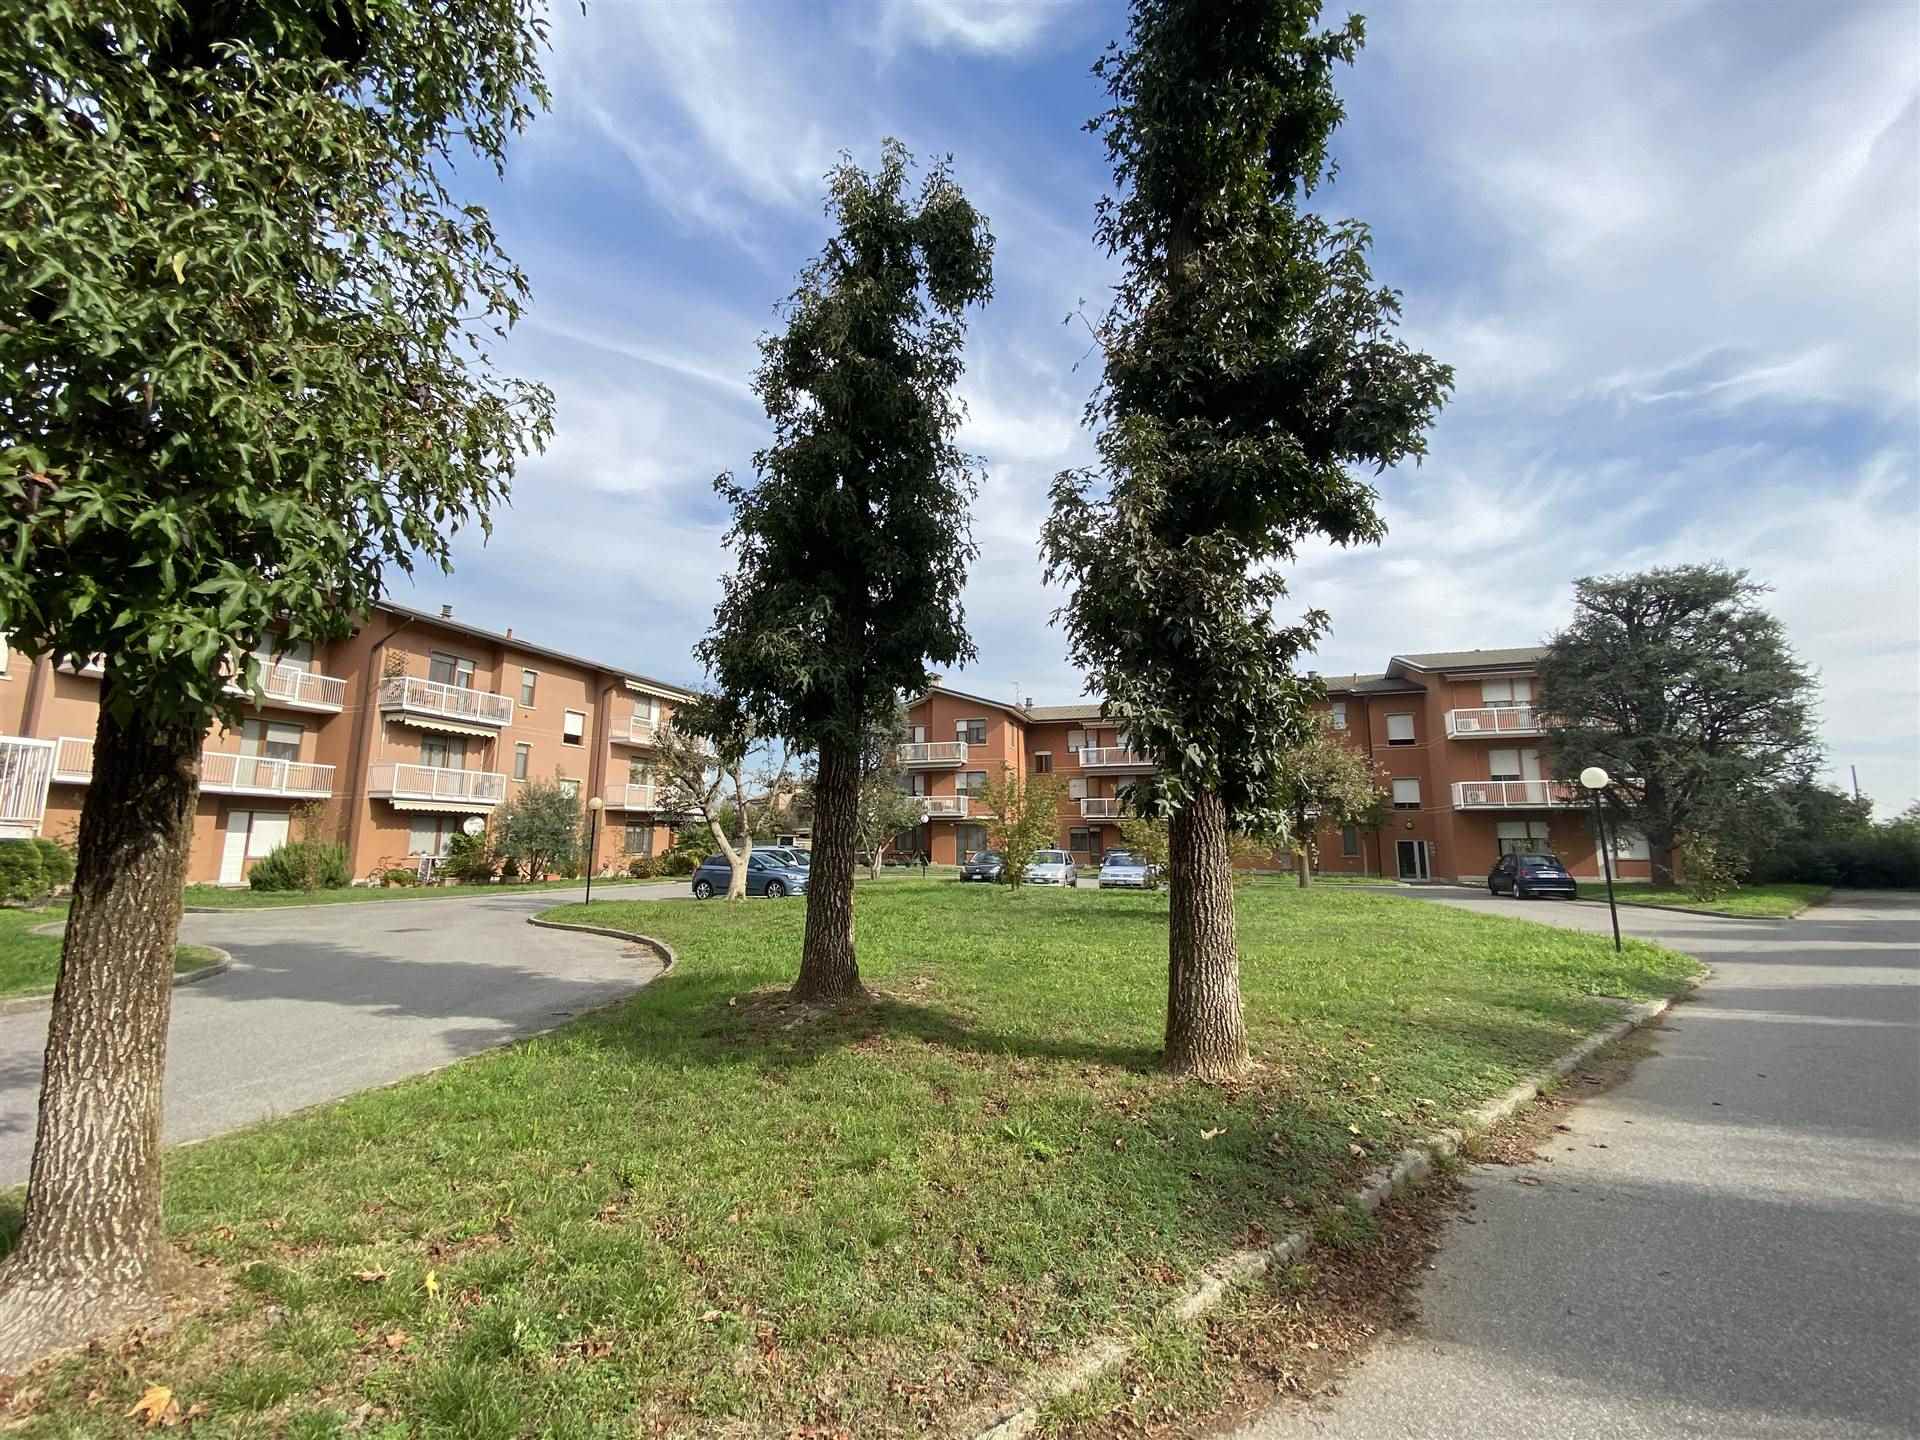 GROPPELLO D'ADDA, CASSANO D'ADDA, Apartment for sale of 90 Sq. mt., Habitable, Heating Individual heating system, Energetic class: G, Epi: 389,78 